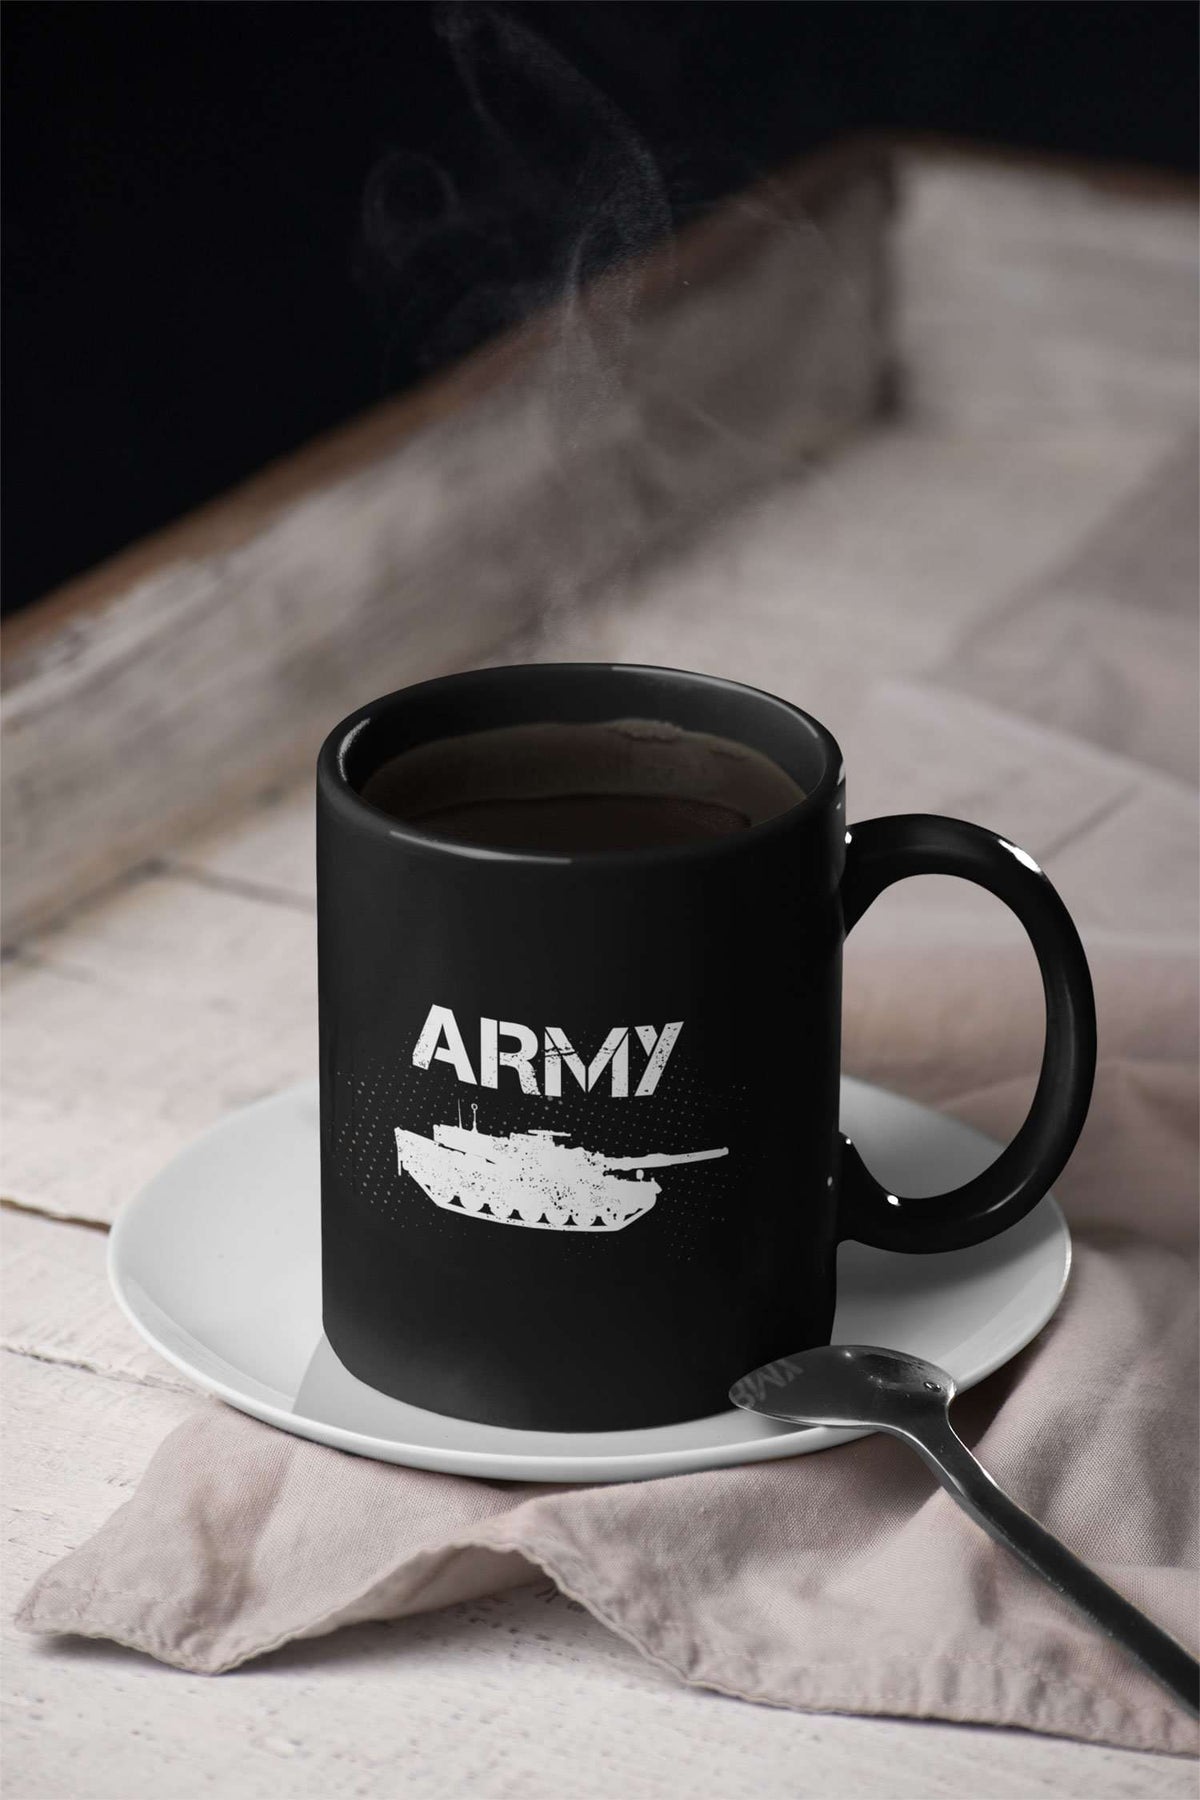 Designs by MyUtopia Shout Out:Army Tank Ceramic Coffee Mug - Black,11 oz / Black,Ceramic Coffee Mug